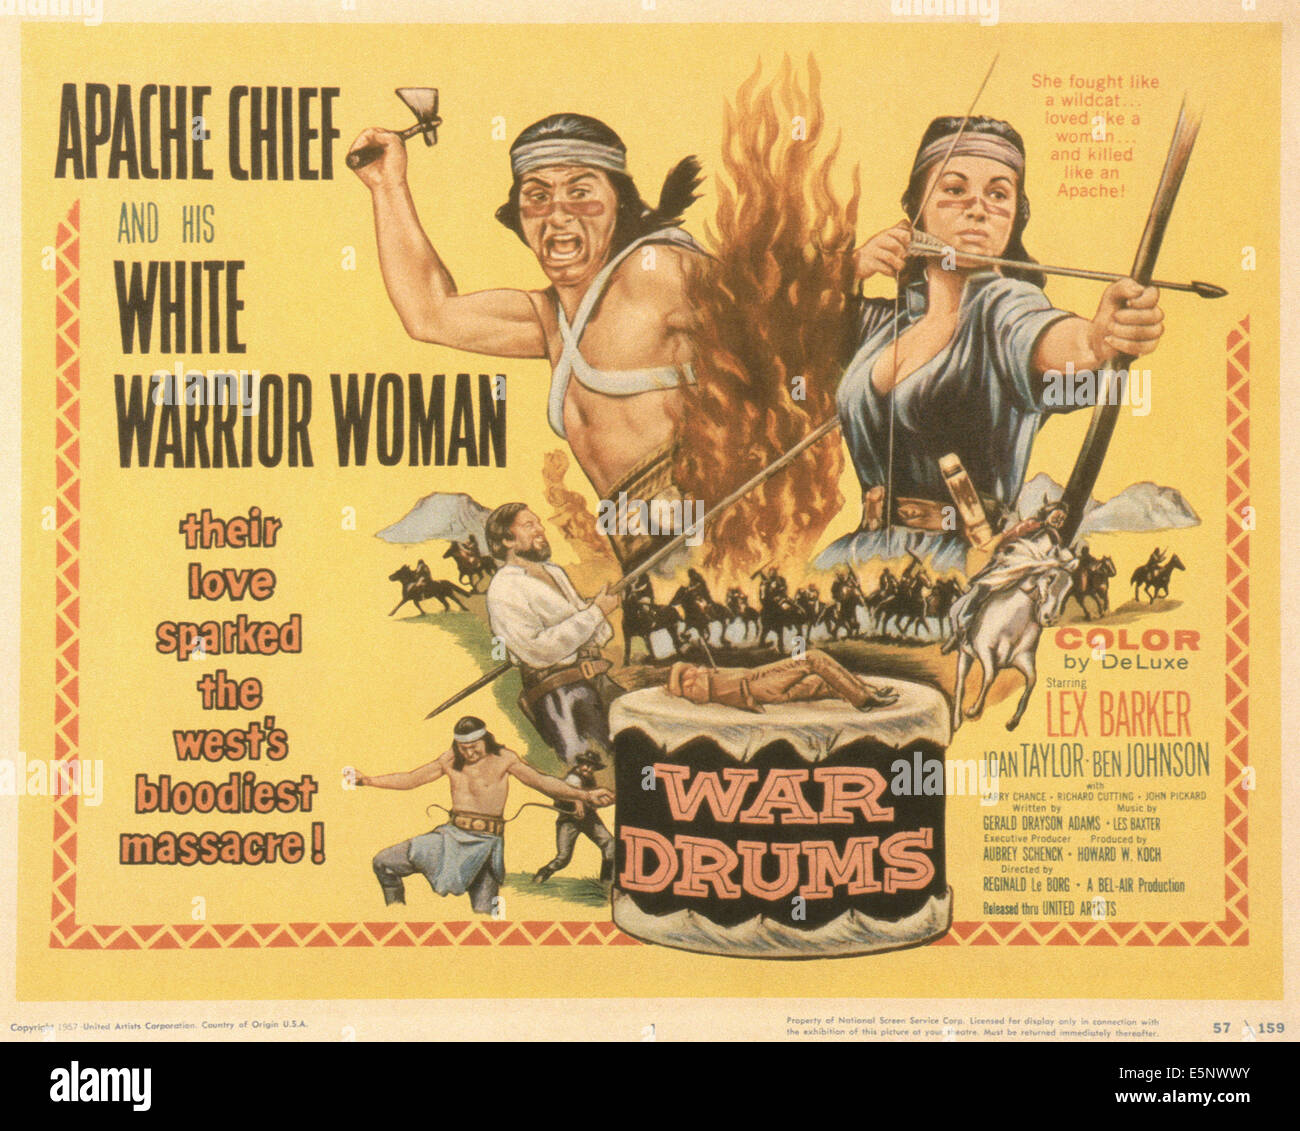 war-drums-us-poster-top-from-left-lex-barker-joan-taylor-1957-E5NWWY.jpg